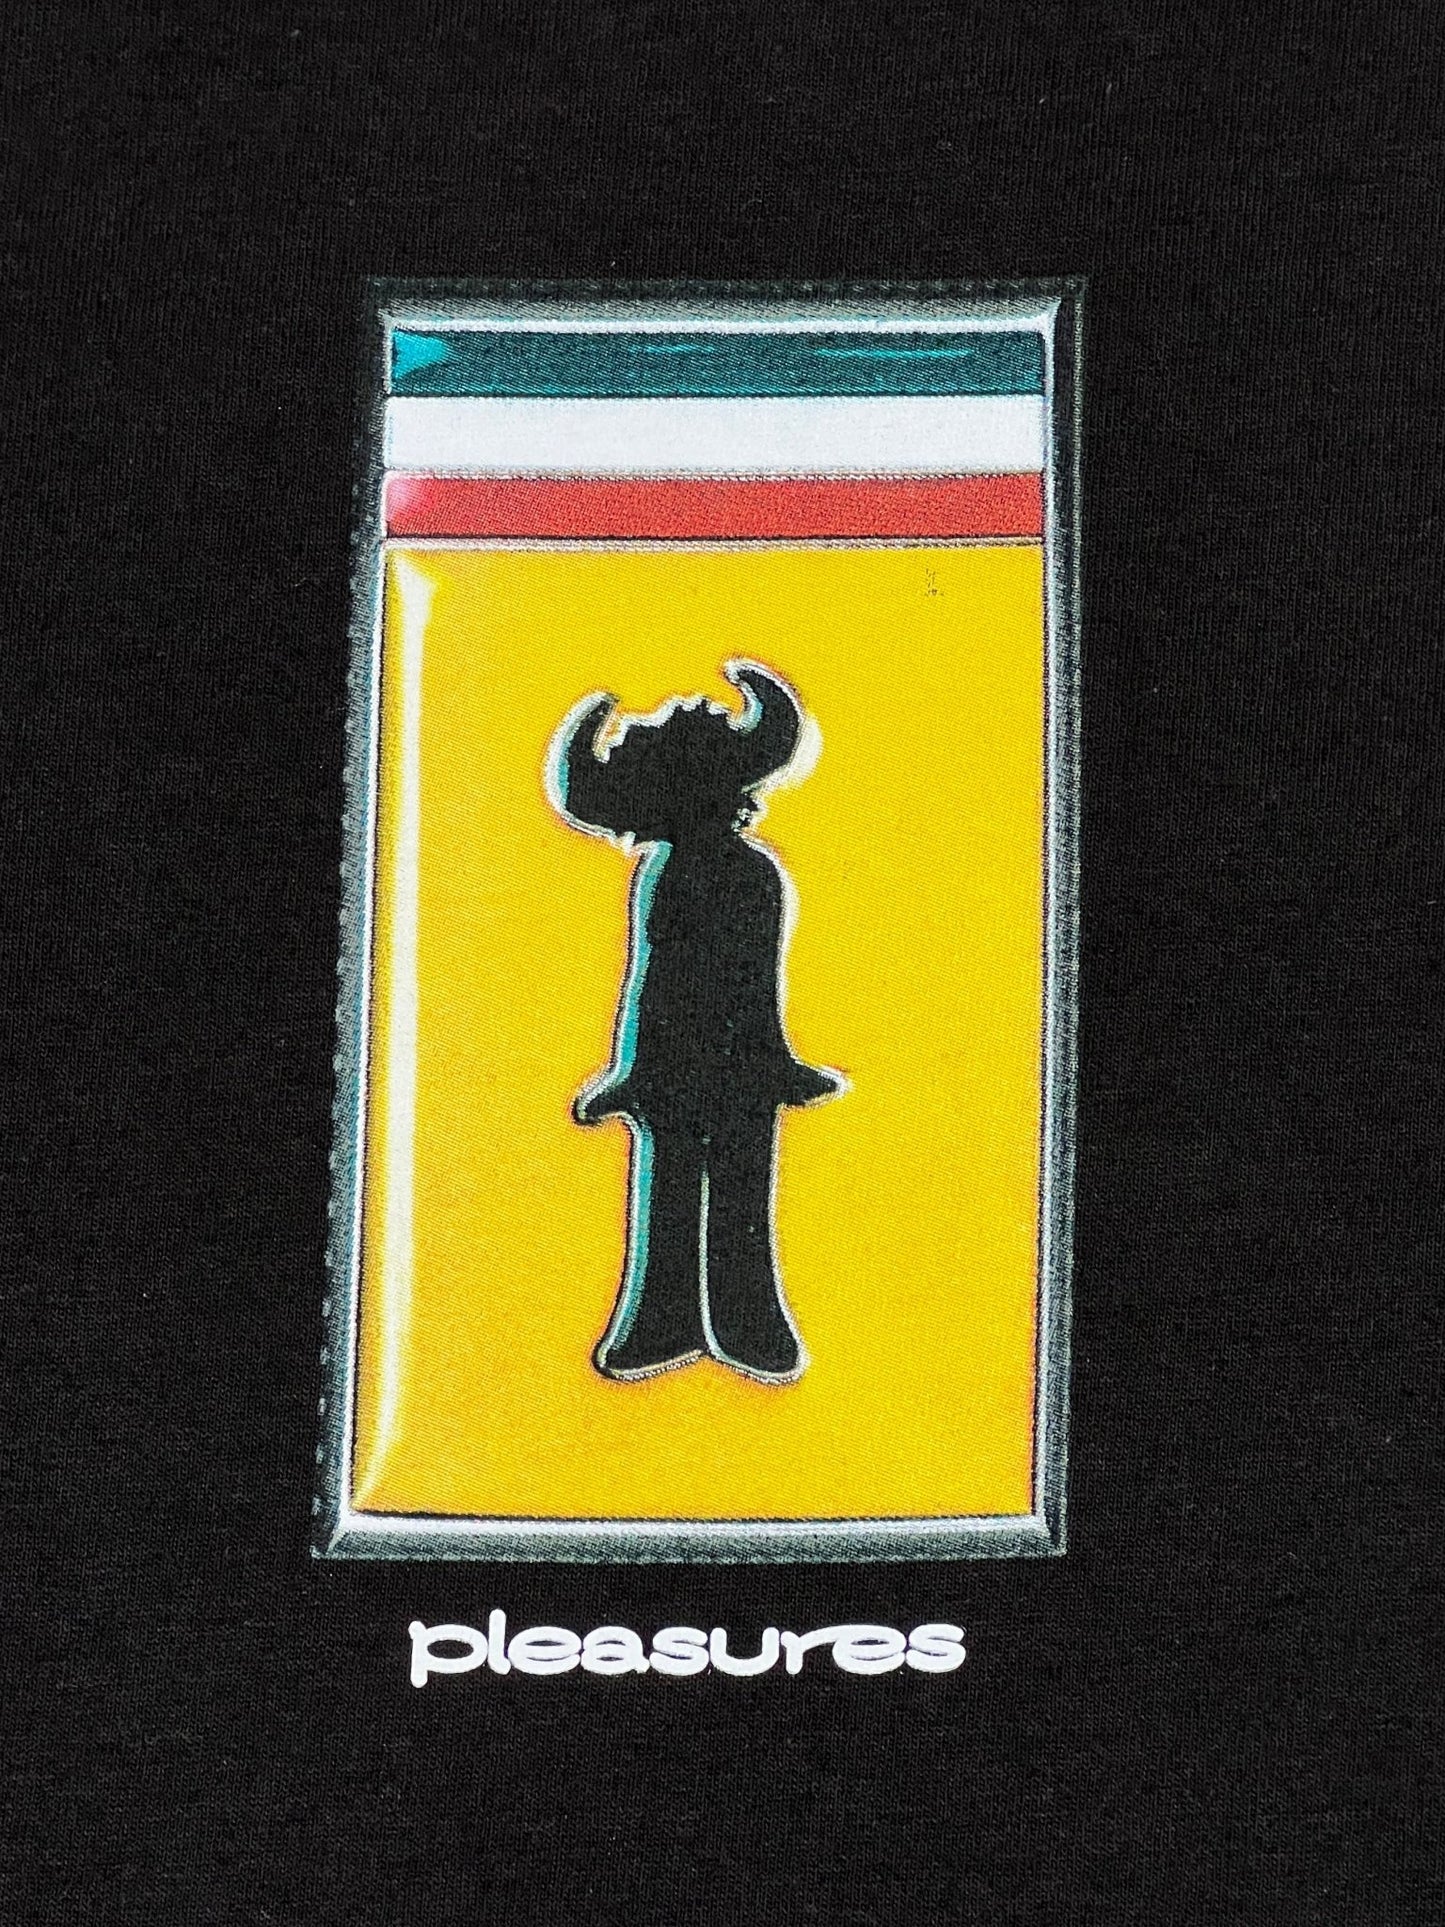 Sentence with replaced product name: PLEASURES TRAVELLING T-SHIRT BLACK - Black.